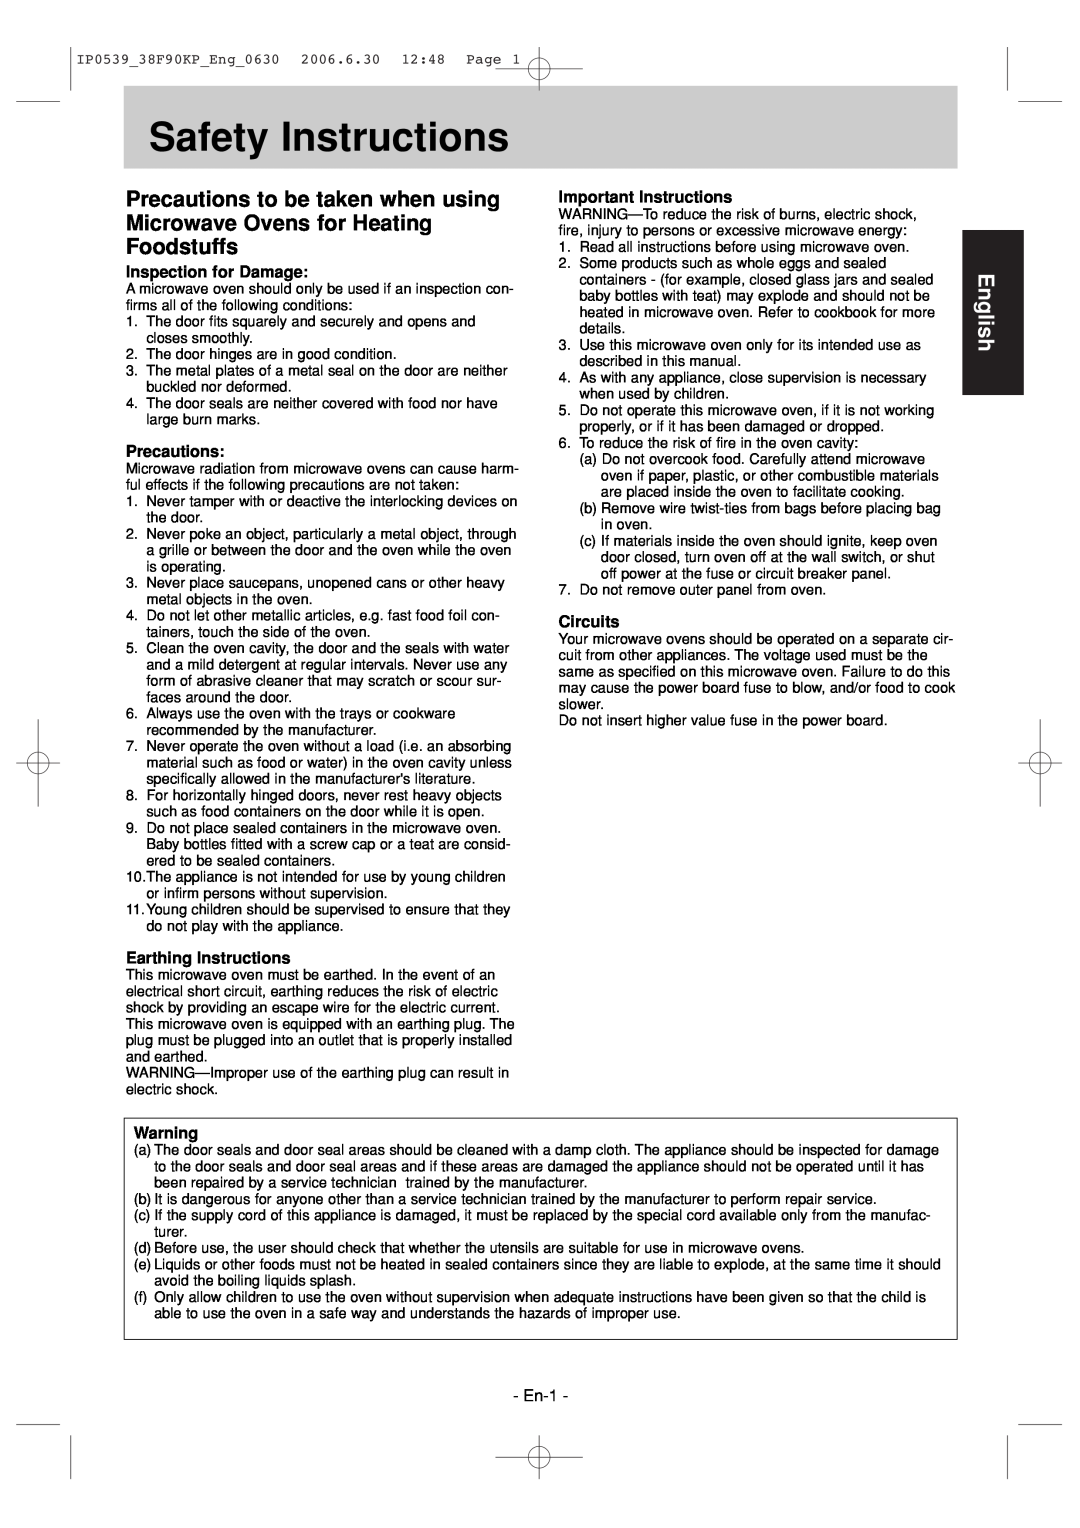 Panasonic NN-ST686S Safety Instructions, English, Inspection for Damage, Precautions, Important Instructions, Circuits 